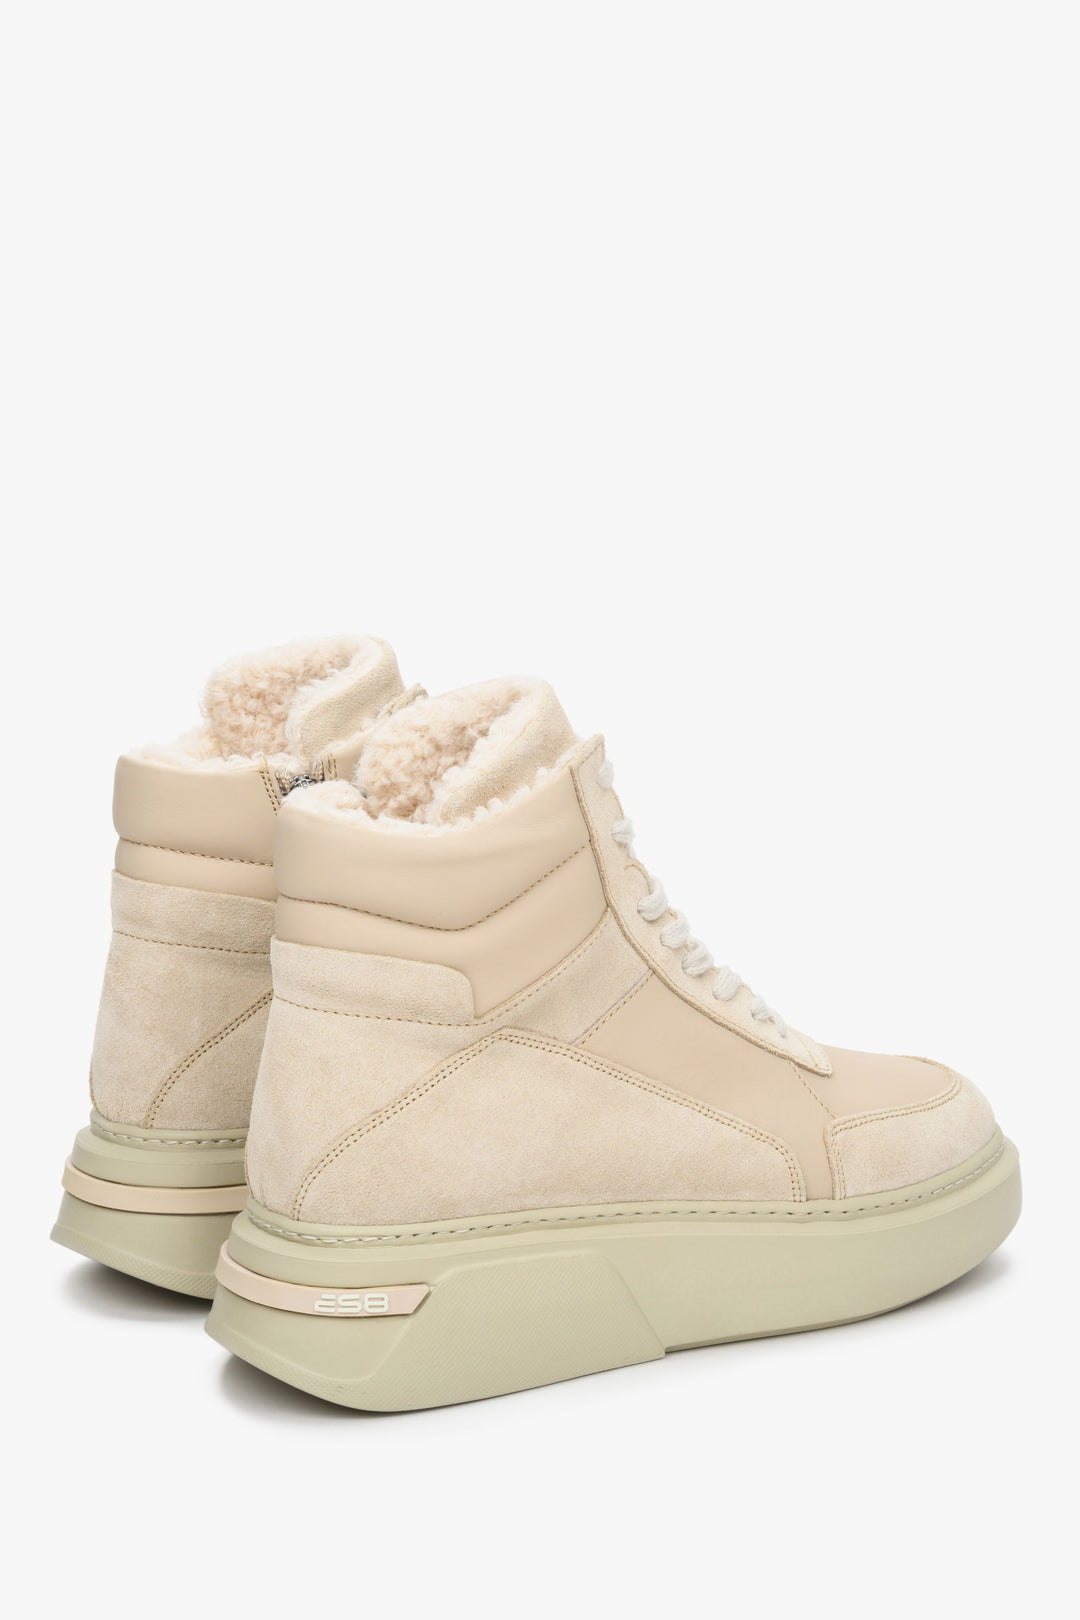 Women's beige high top sneakers by ES 8 for winter/fall.